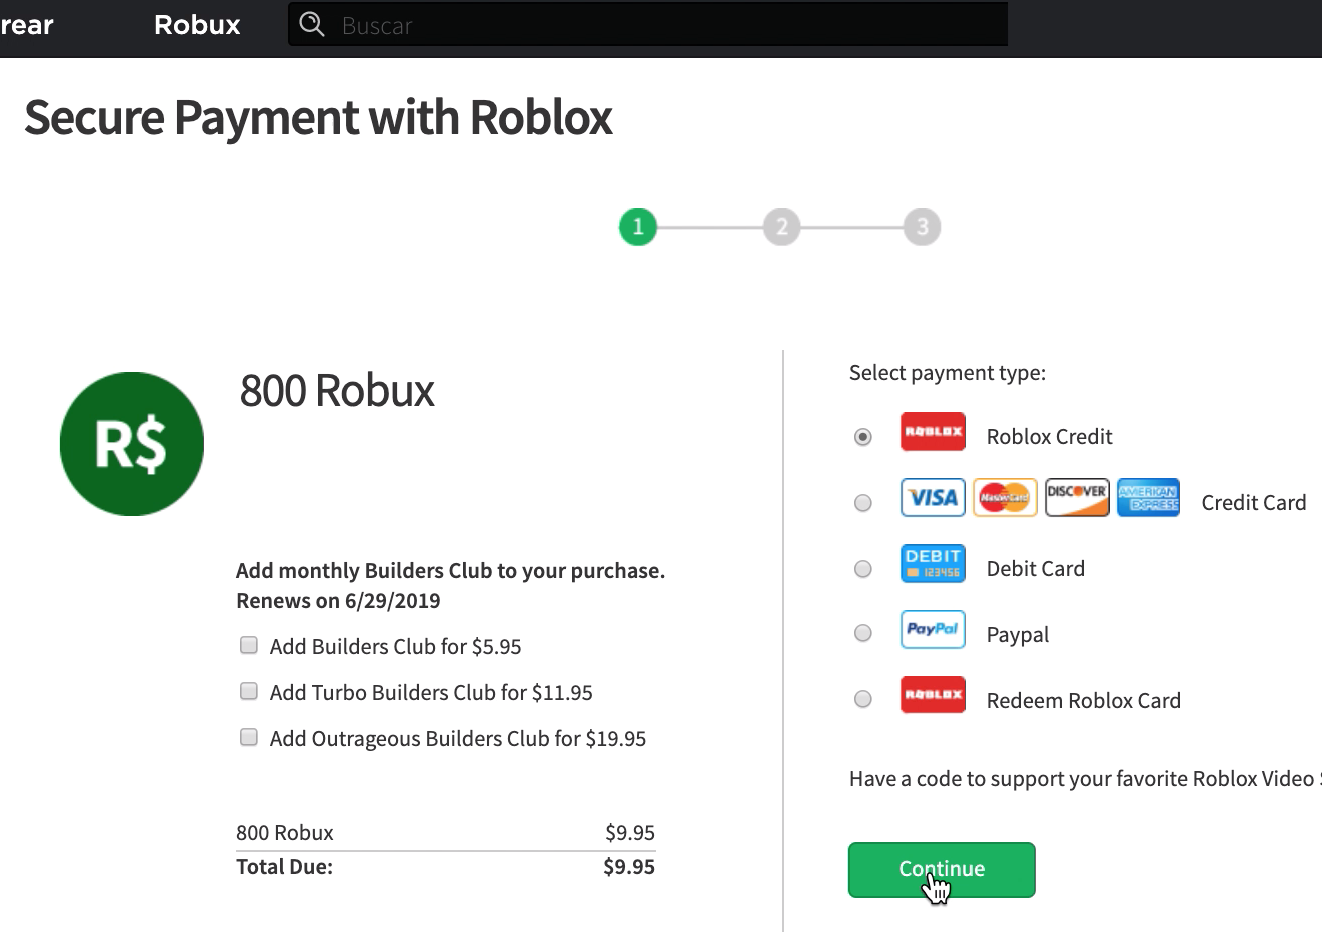 Pin Roblox Card How To Get Free Robux Codes 2019 February - free roblox cards pin number